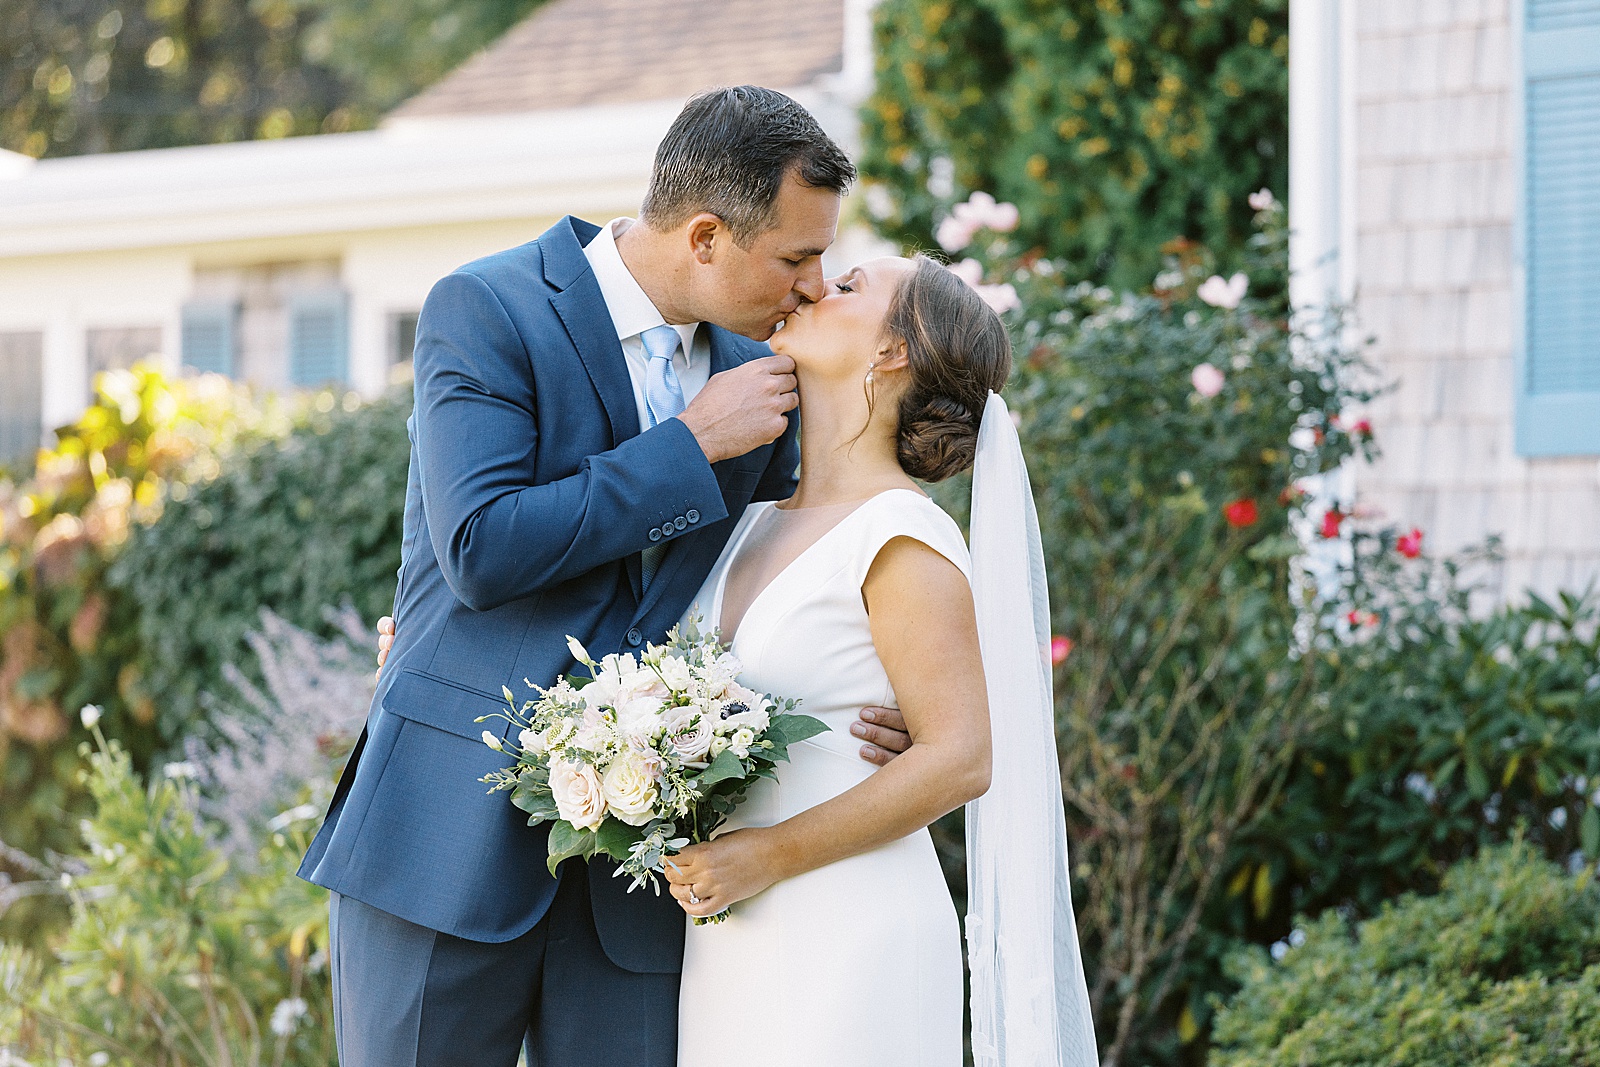 Groom in blue suit kissing bride with white flowers for New York Wedding